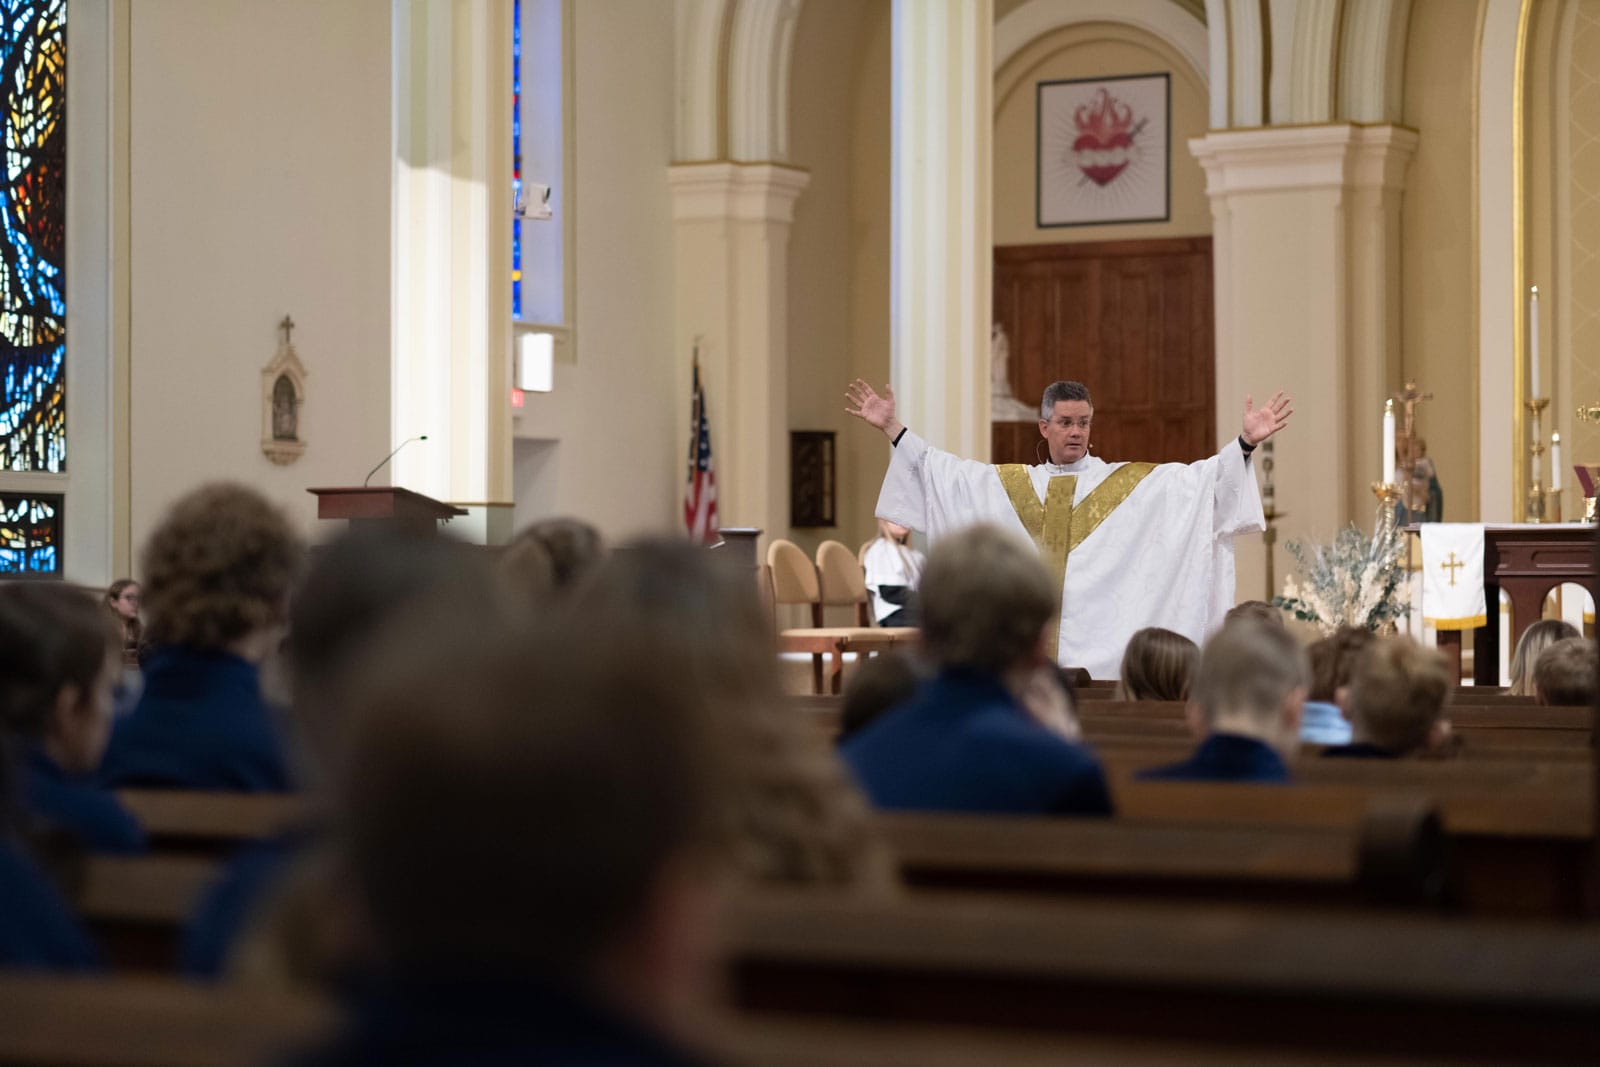 Man with hands raised giving sermon at a church adorned in white and gold clothes.